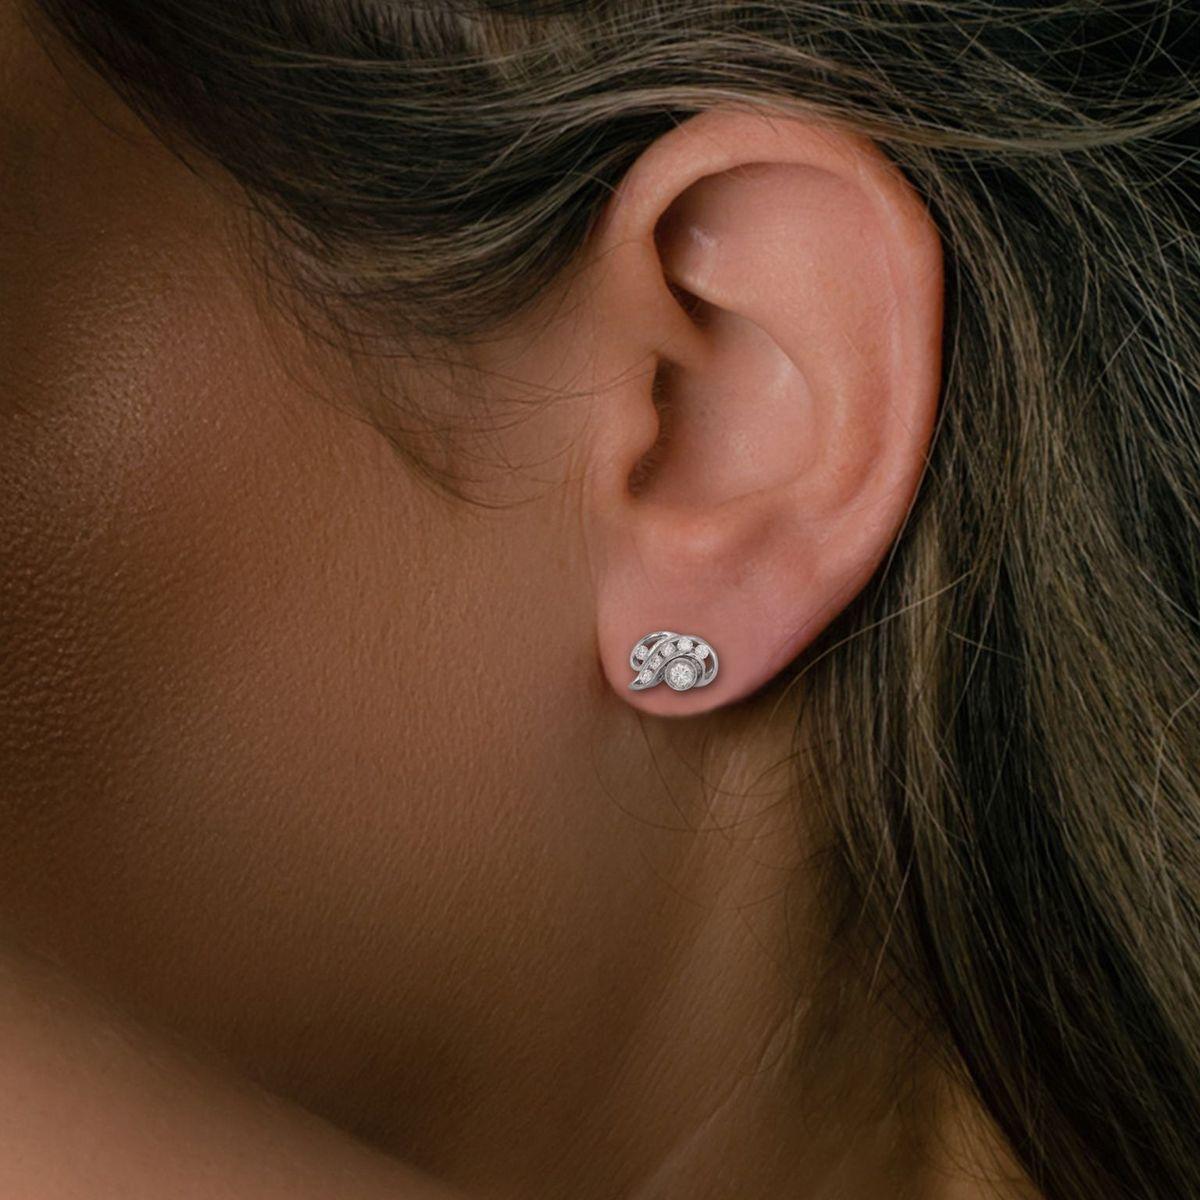 These Elegant Diamond Earrings are a versatile accessory that adds a touch of elegance to any outfit. Their timeless design allows them to complement a wide range of styles, making them an ideal choice for those who appreciate the enduring beauty